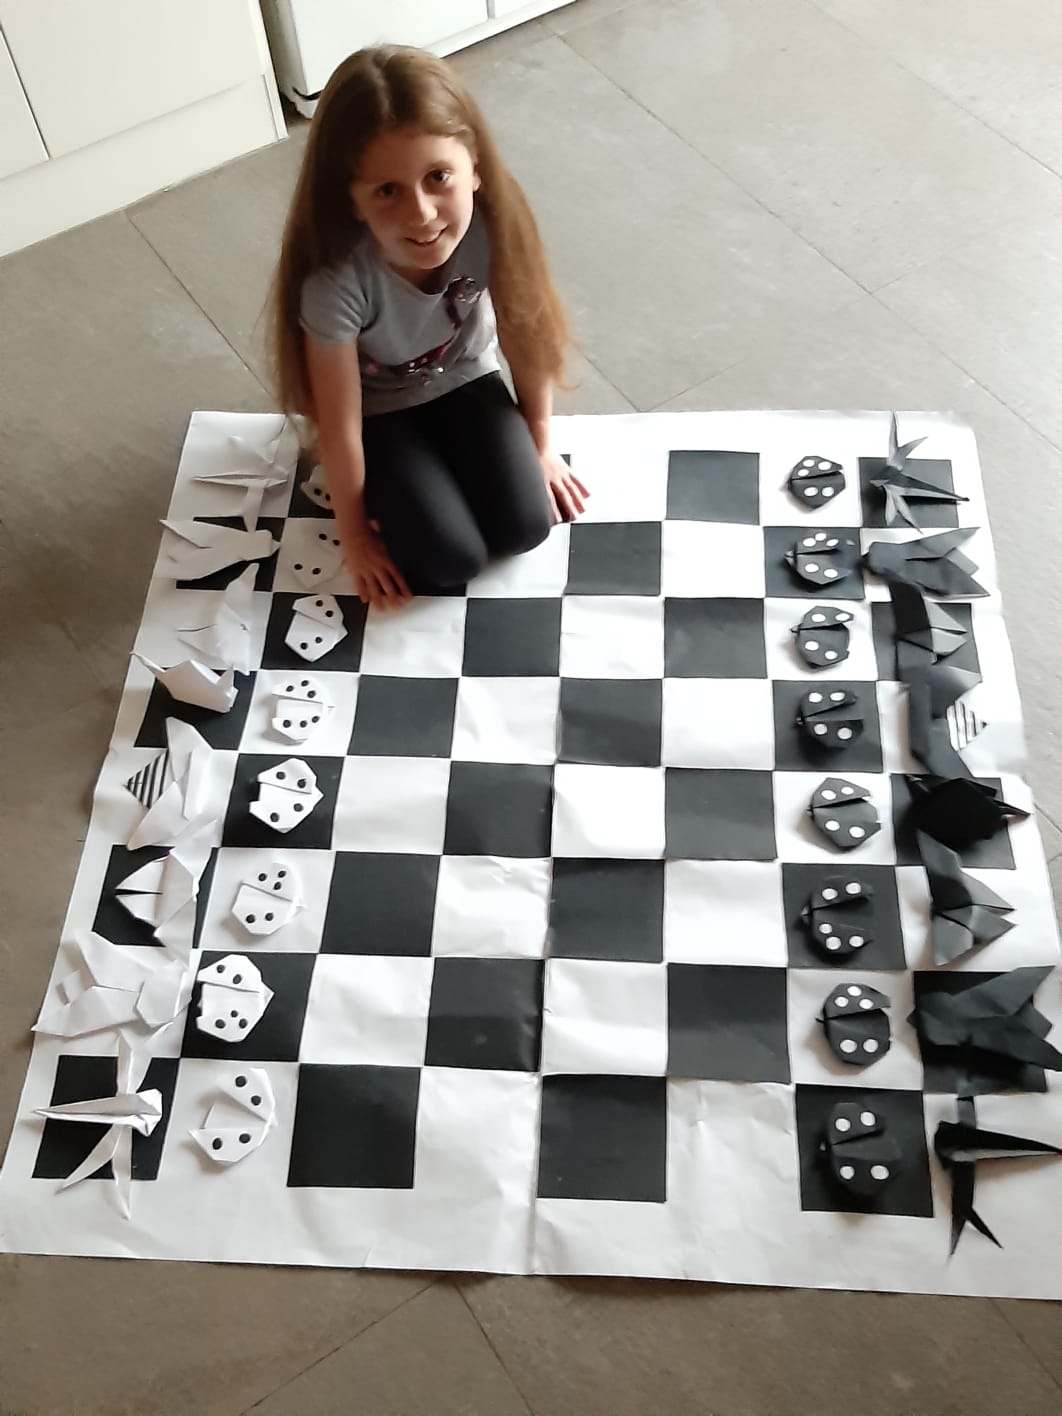 Names of all chess pieces, Teach Chess to kids, Free Chess course for kids